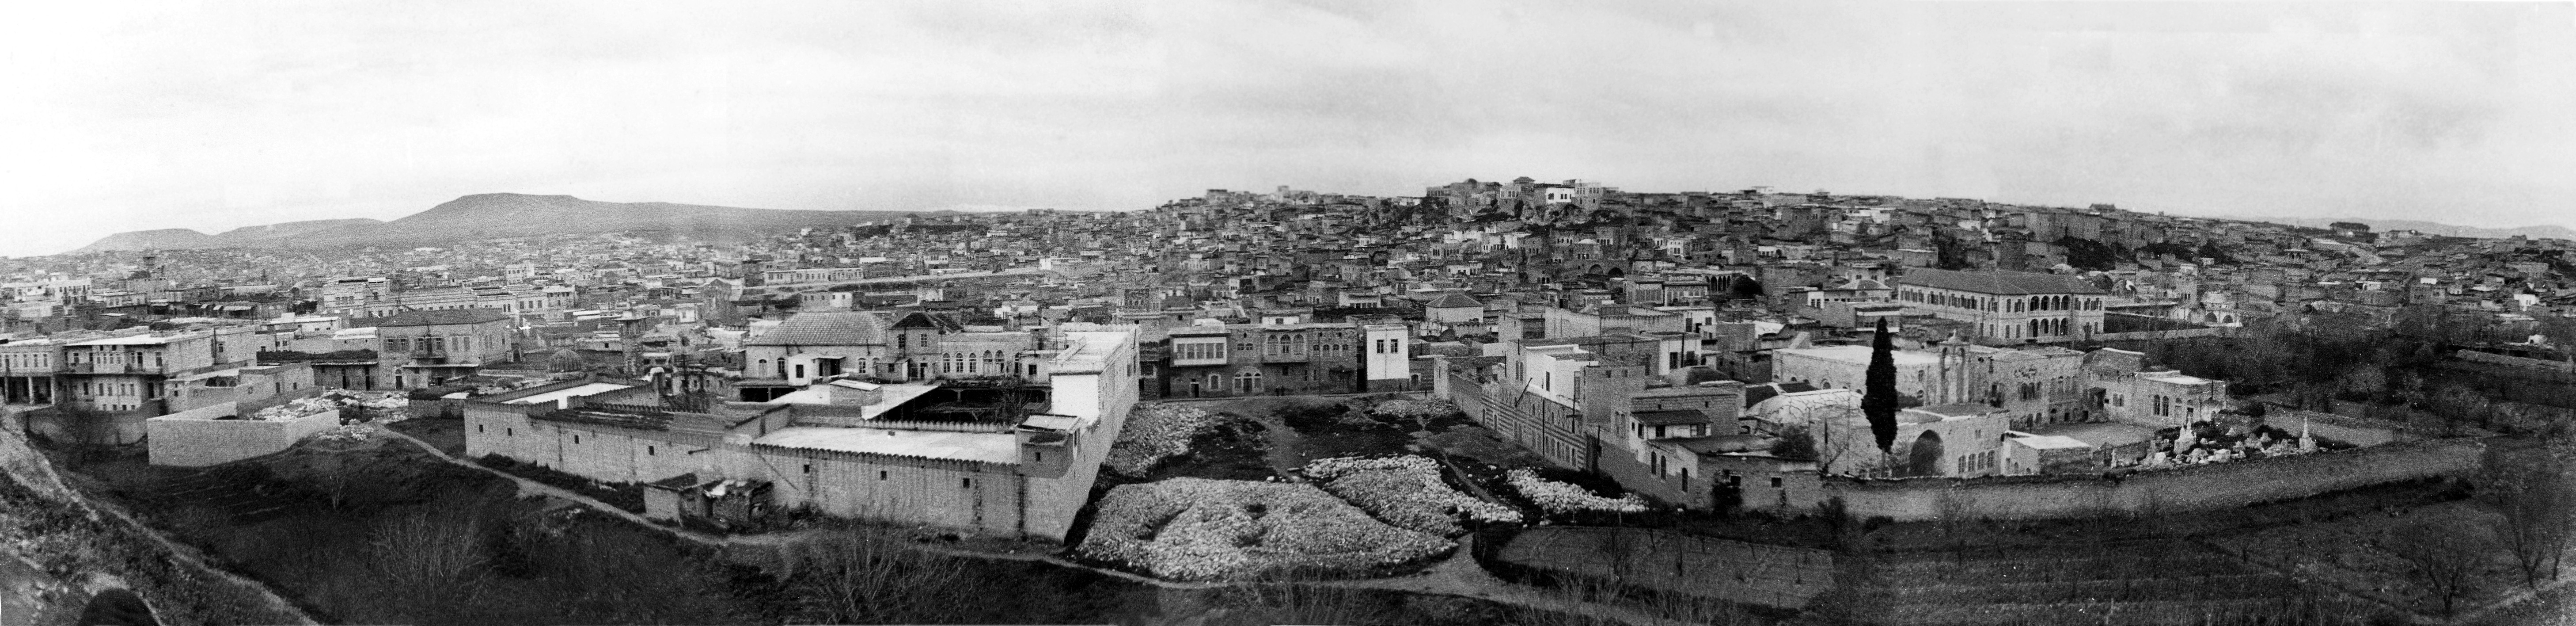  Hama - <p><strong>View from Hama Citadel towards Al-Madina Area</strong></p><p>Taken from Hama Citadel towards the southeast, this panorama showcases the Al-Madina area. Notable features include Al-Hassanin Mosque, with its minaret and dome to the left, and the Greek Orthodox church (Our Lady of Entry) to the right. In the background, the minaret of the Great Mosque is visible to the right.</p>